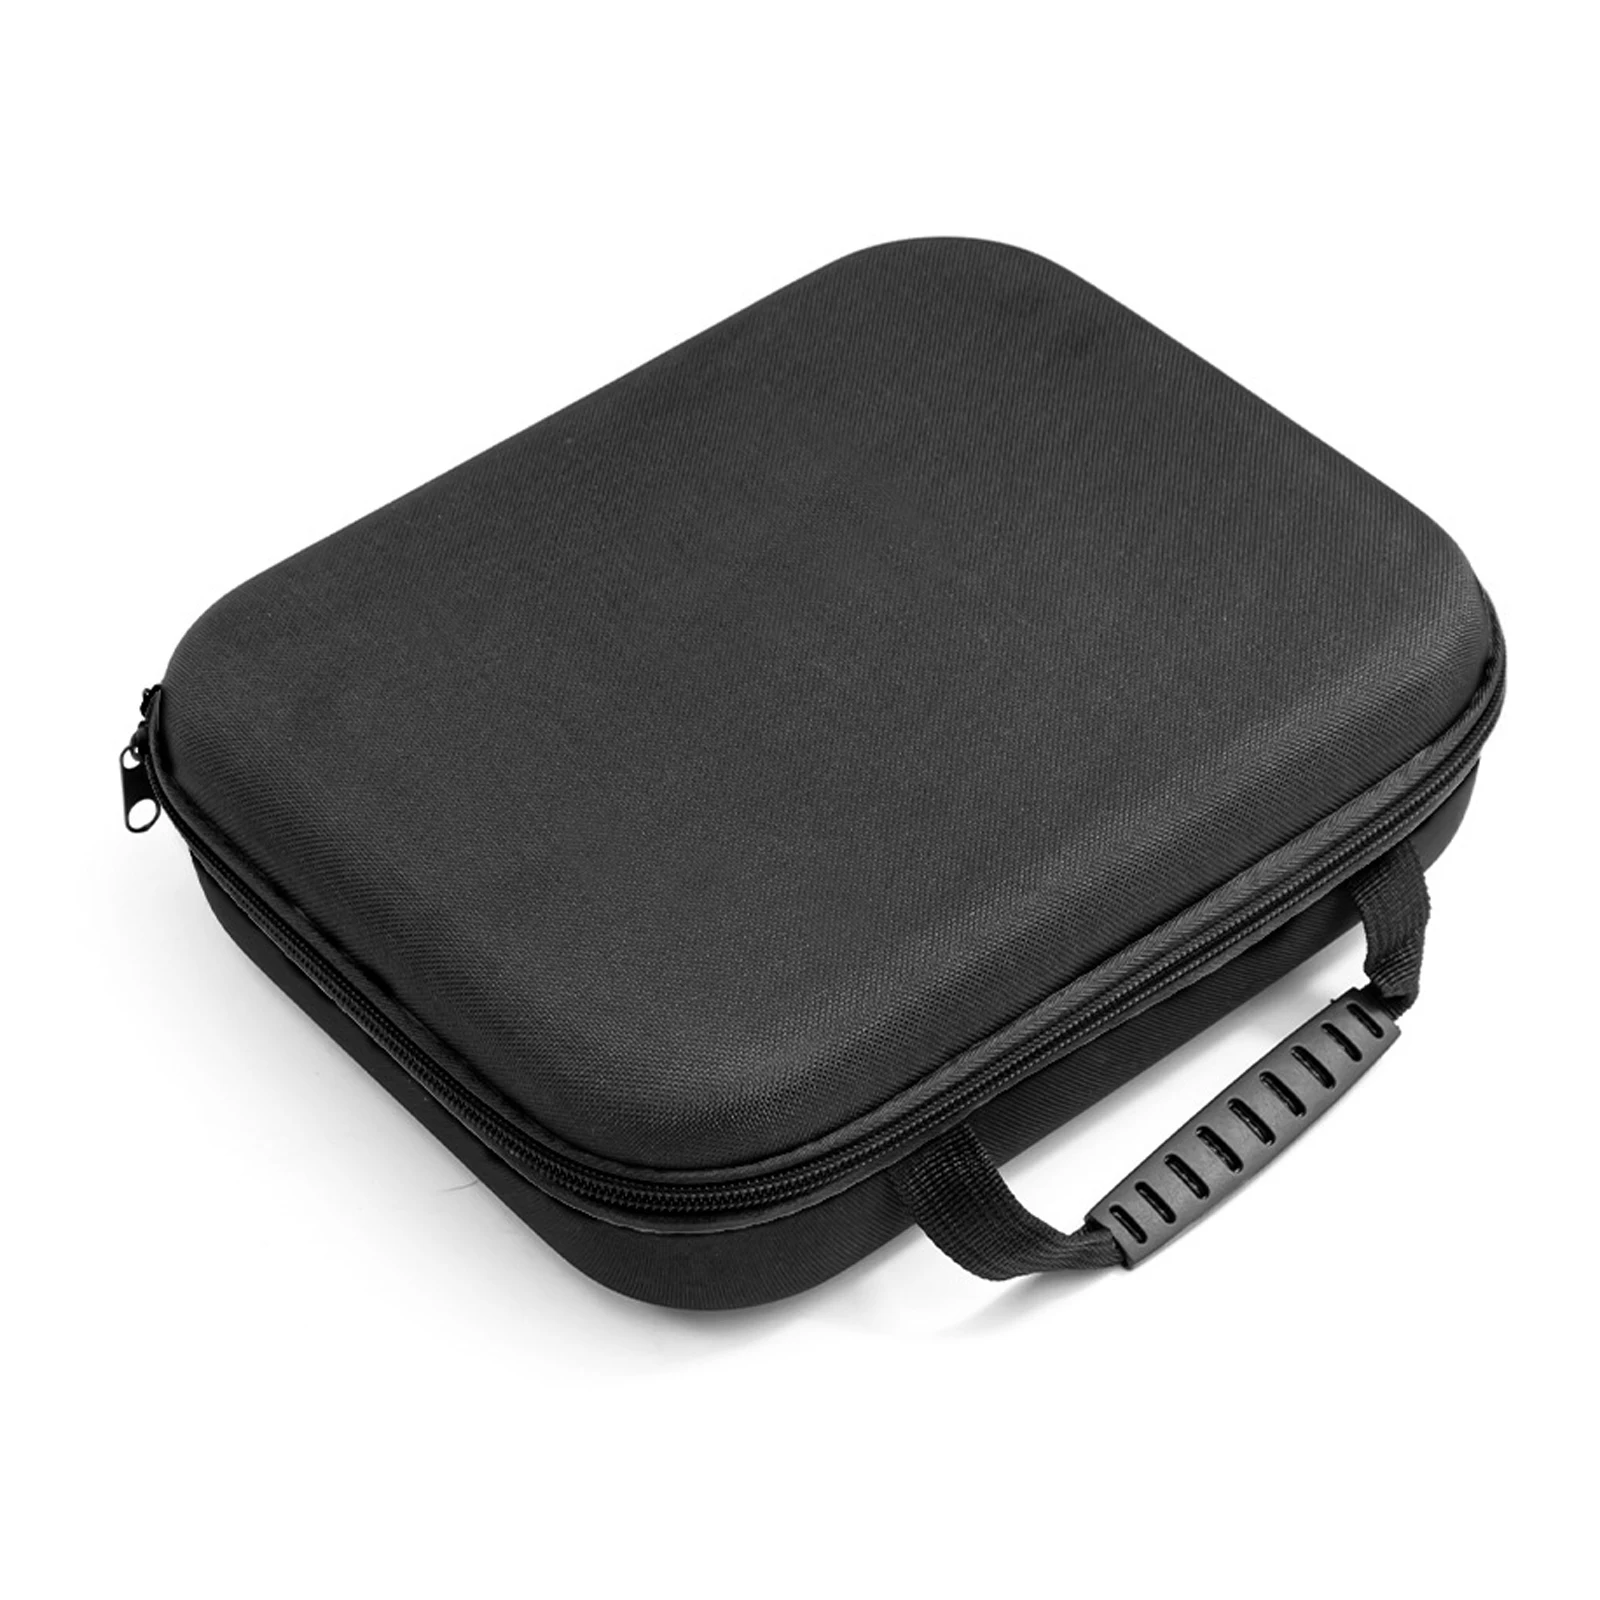 Tool Bag Shockproof Tool Box Waterproof Large Capacity Electric Drill Carry Case Oxford Cloth Bag For Electrician Hardware